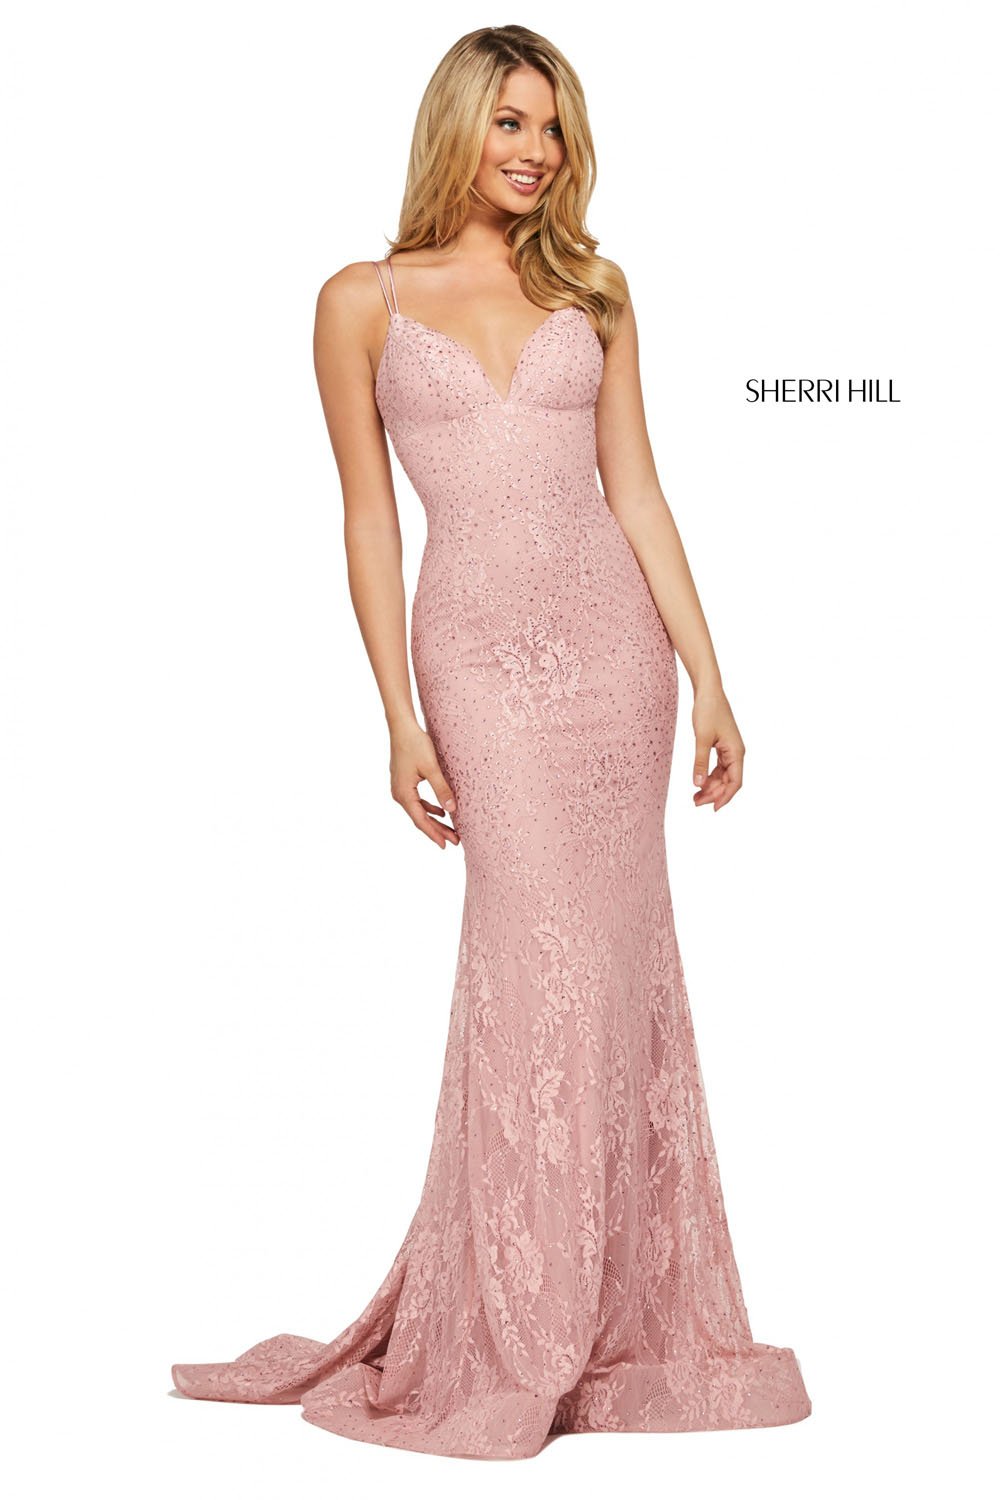 Sherri Hill 53364 dress images in these colors: Pink, Navy, Royal, Red, Ivory, Black, Aqua.